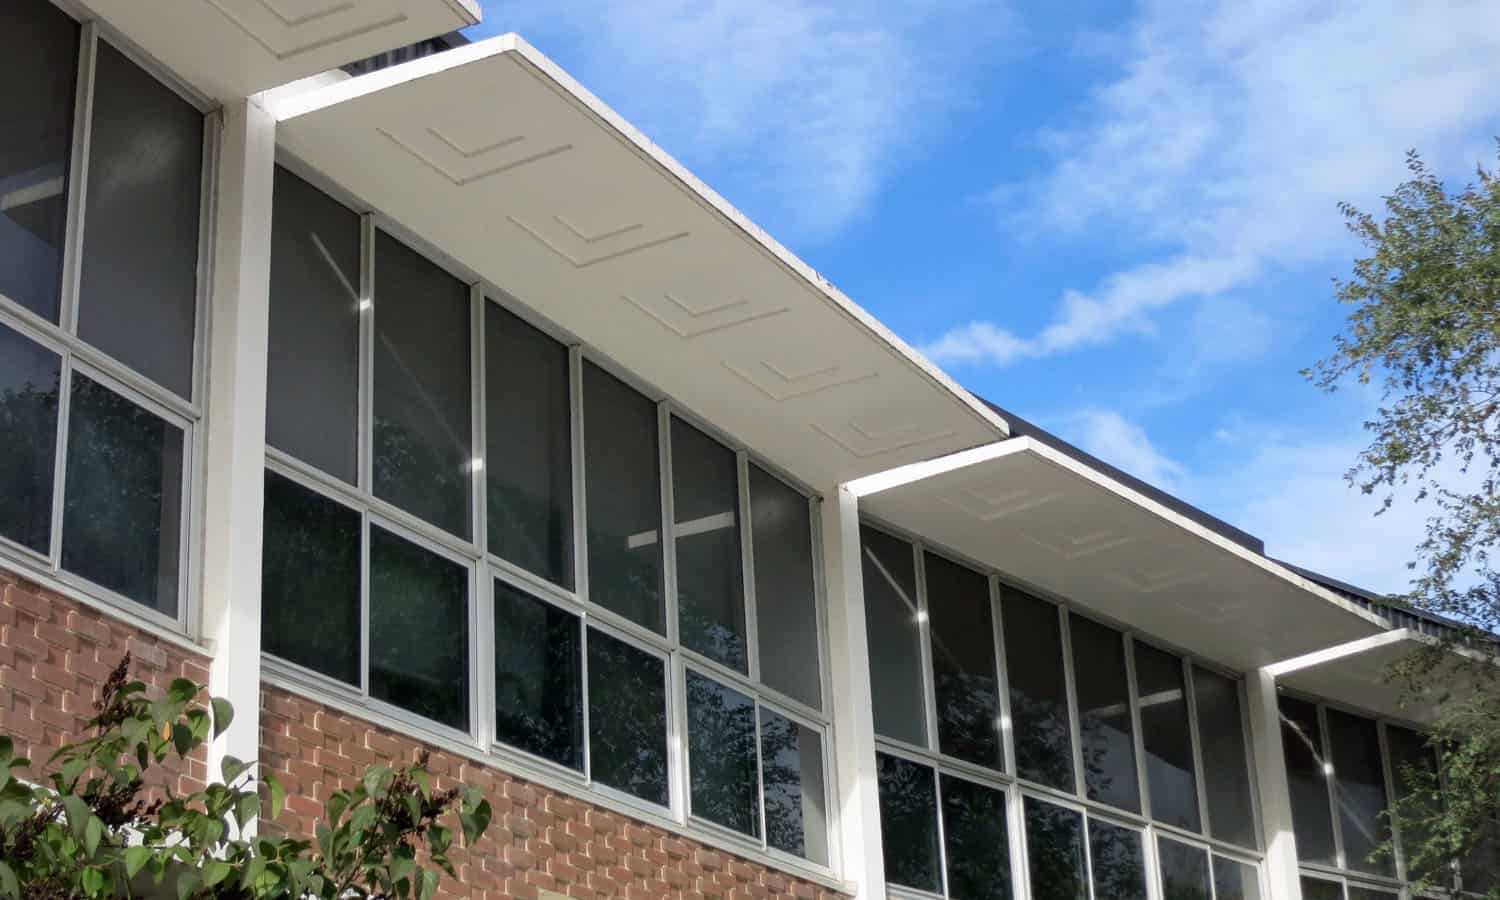 The repeated bays of the curved classroom wing with their brise-soleils with shallow coffers